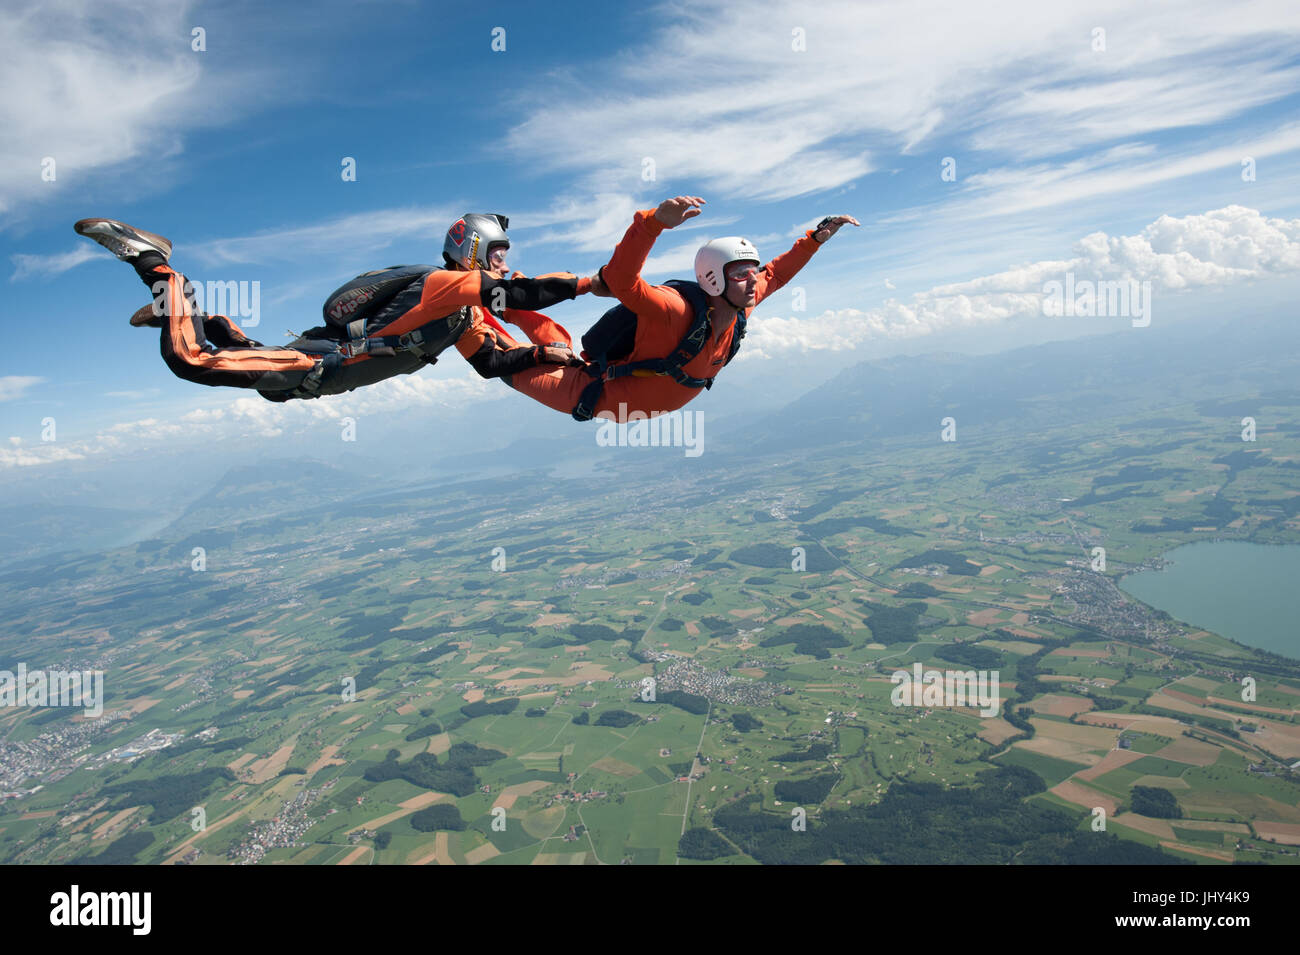 An skydiving instructor is taking a student on a training jump during an AFF course at Beromünster, Switzerland Stock Photo